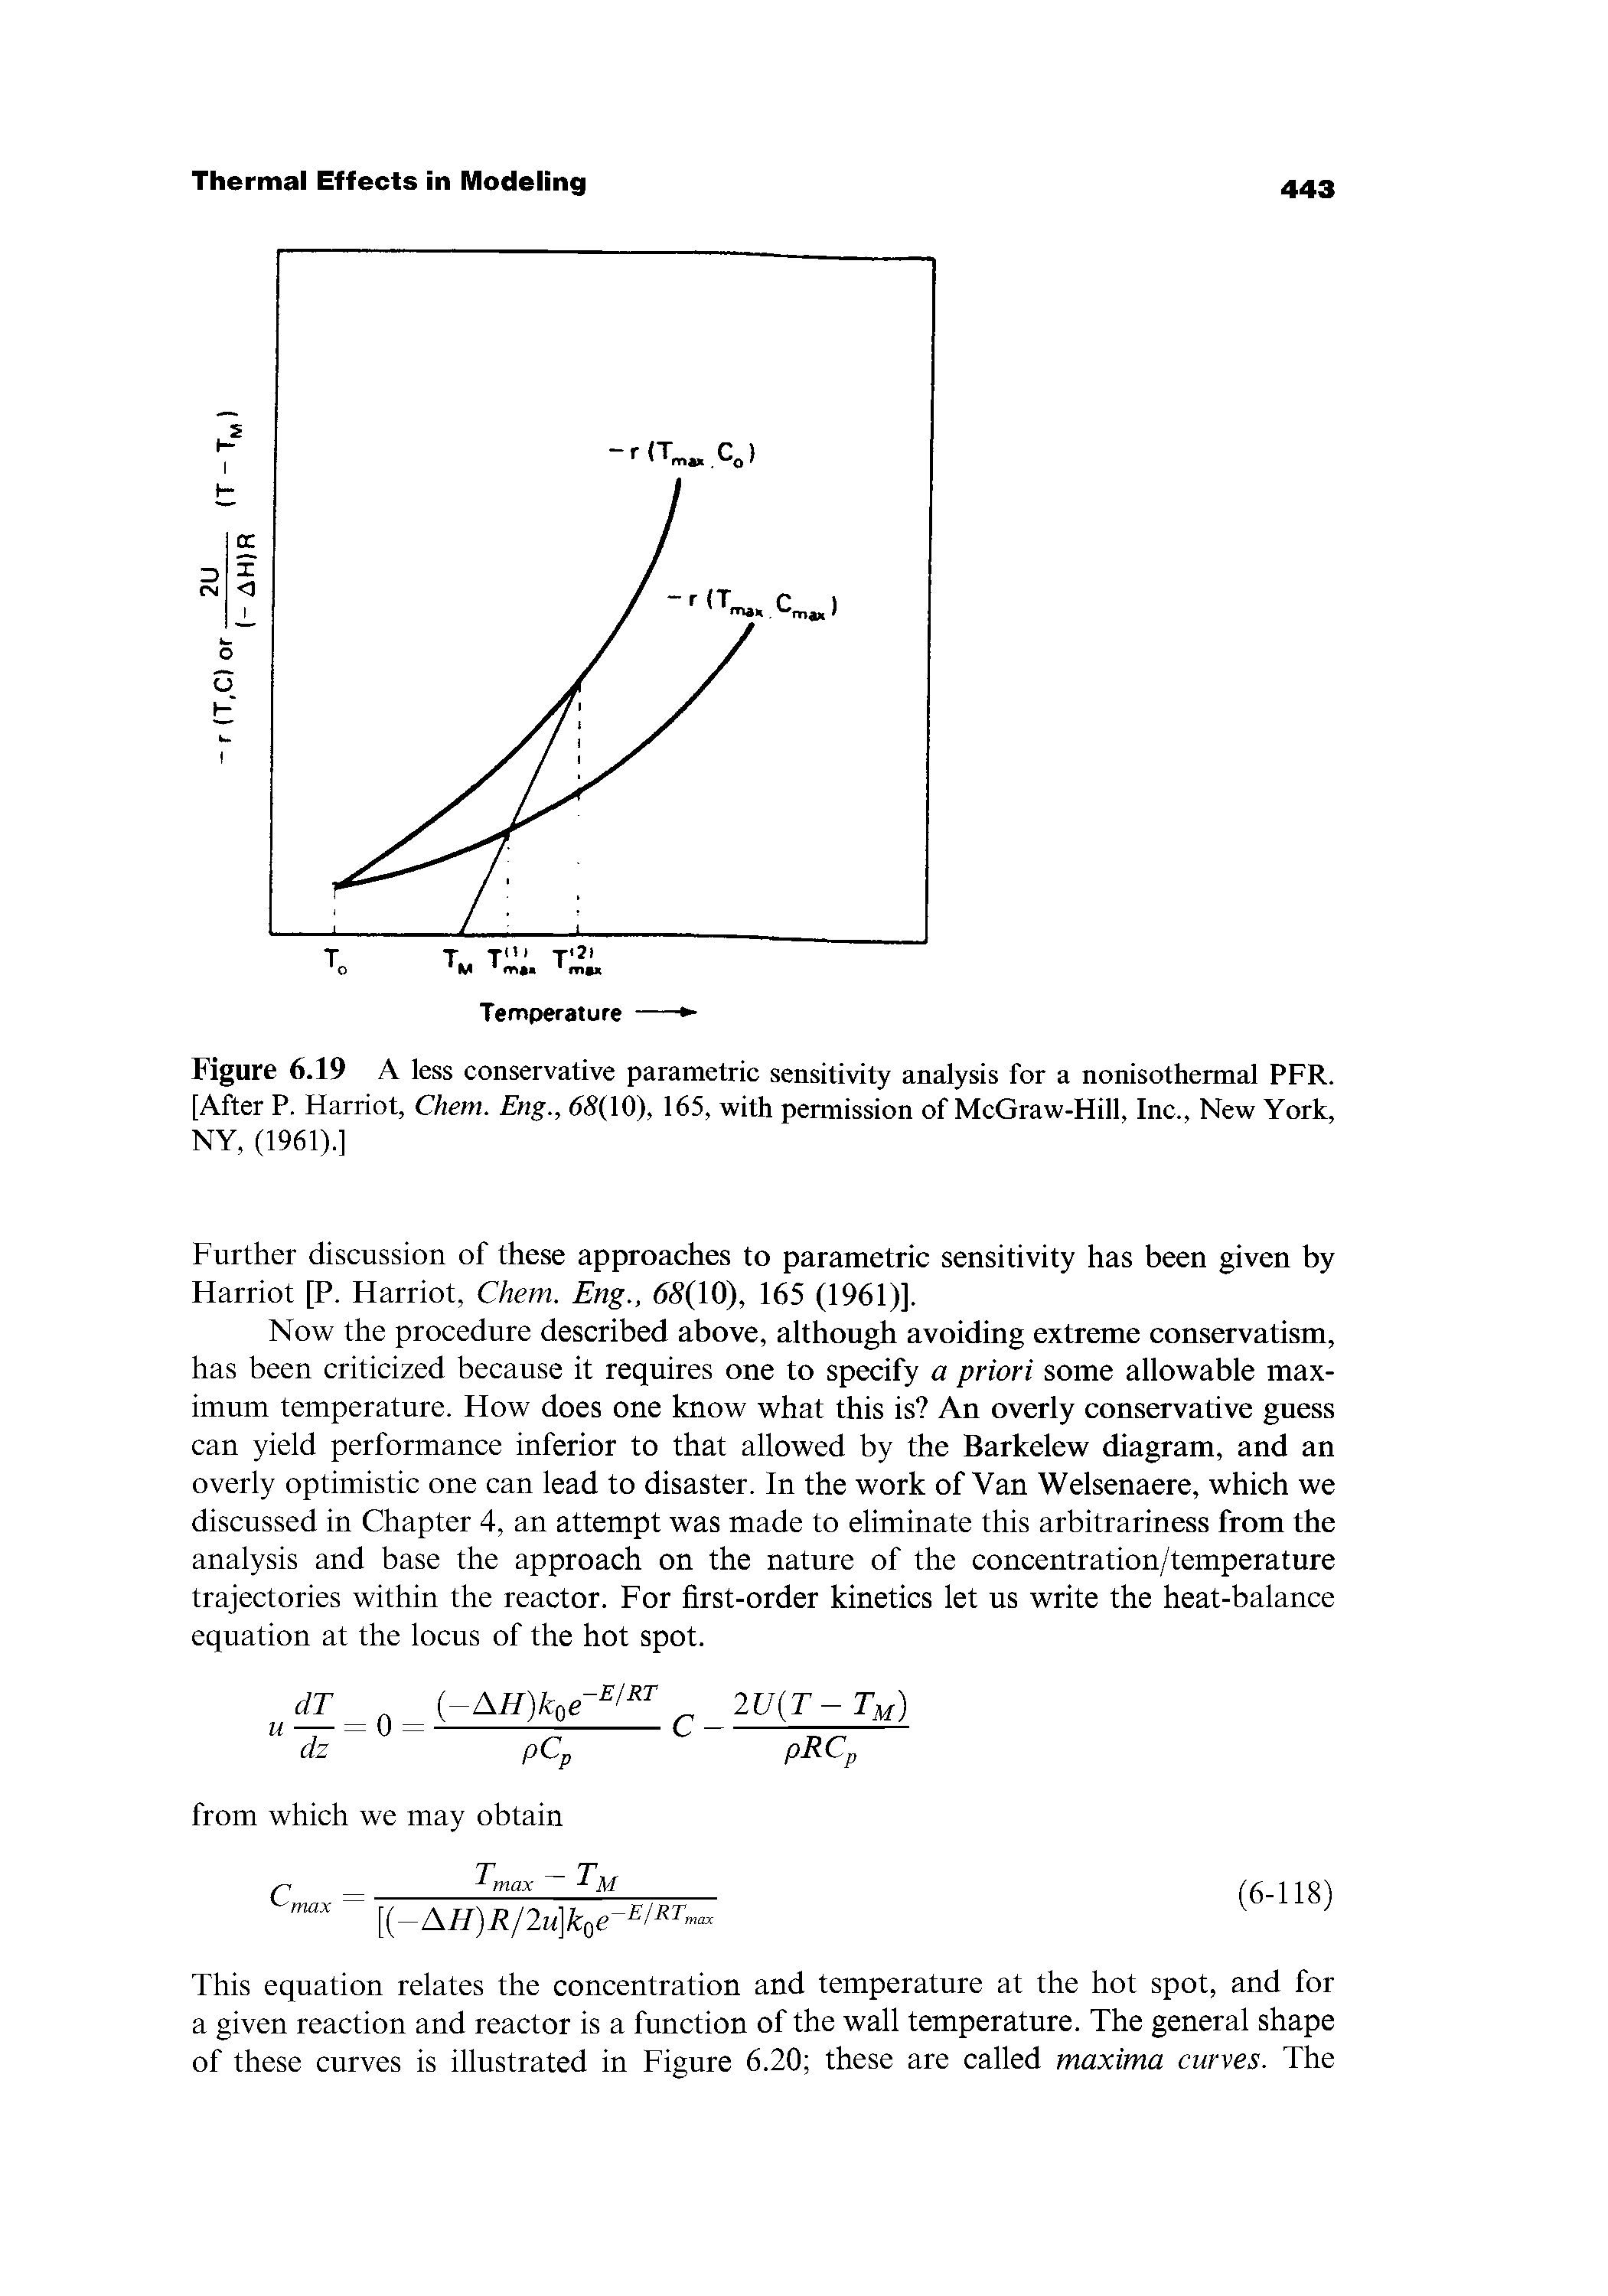 Figure 6.19 A less conservative parametric sensitivity analysis for a nonisothermal PFR. [After P. Harriot, Chem. Eng., 65(10), 165, with permission of McGraw-Hill, Inc., New York, NY, (1961).]...